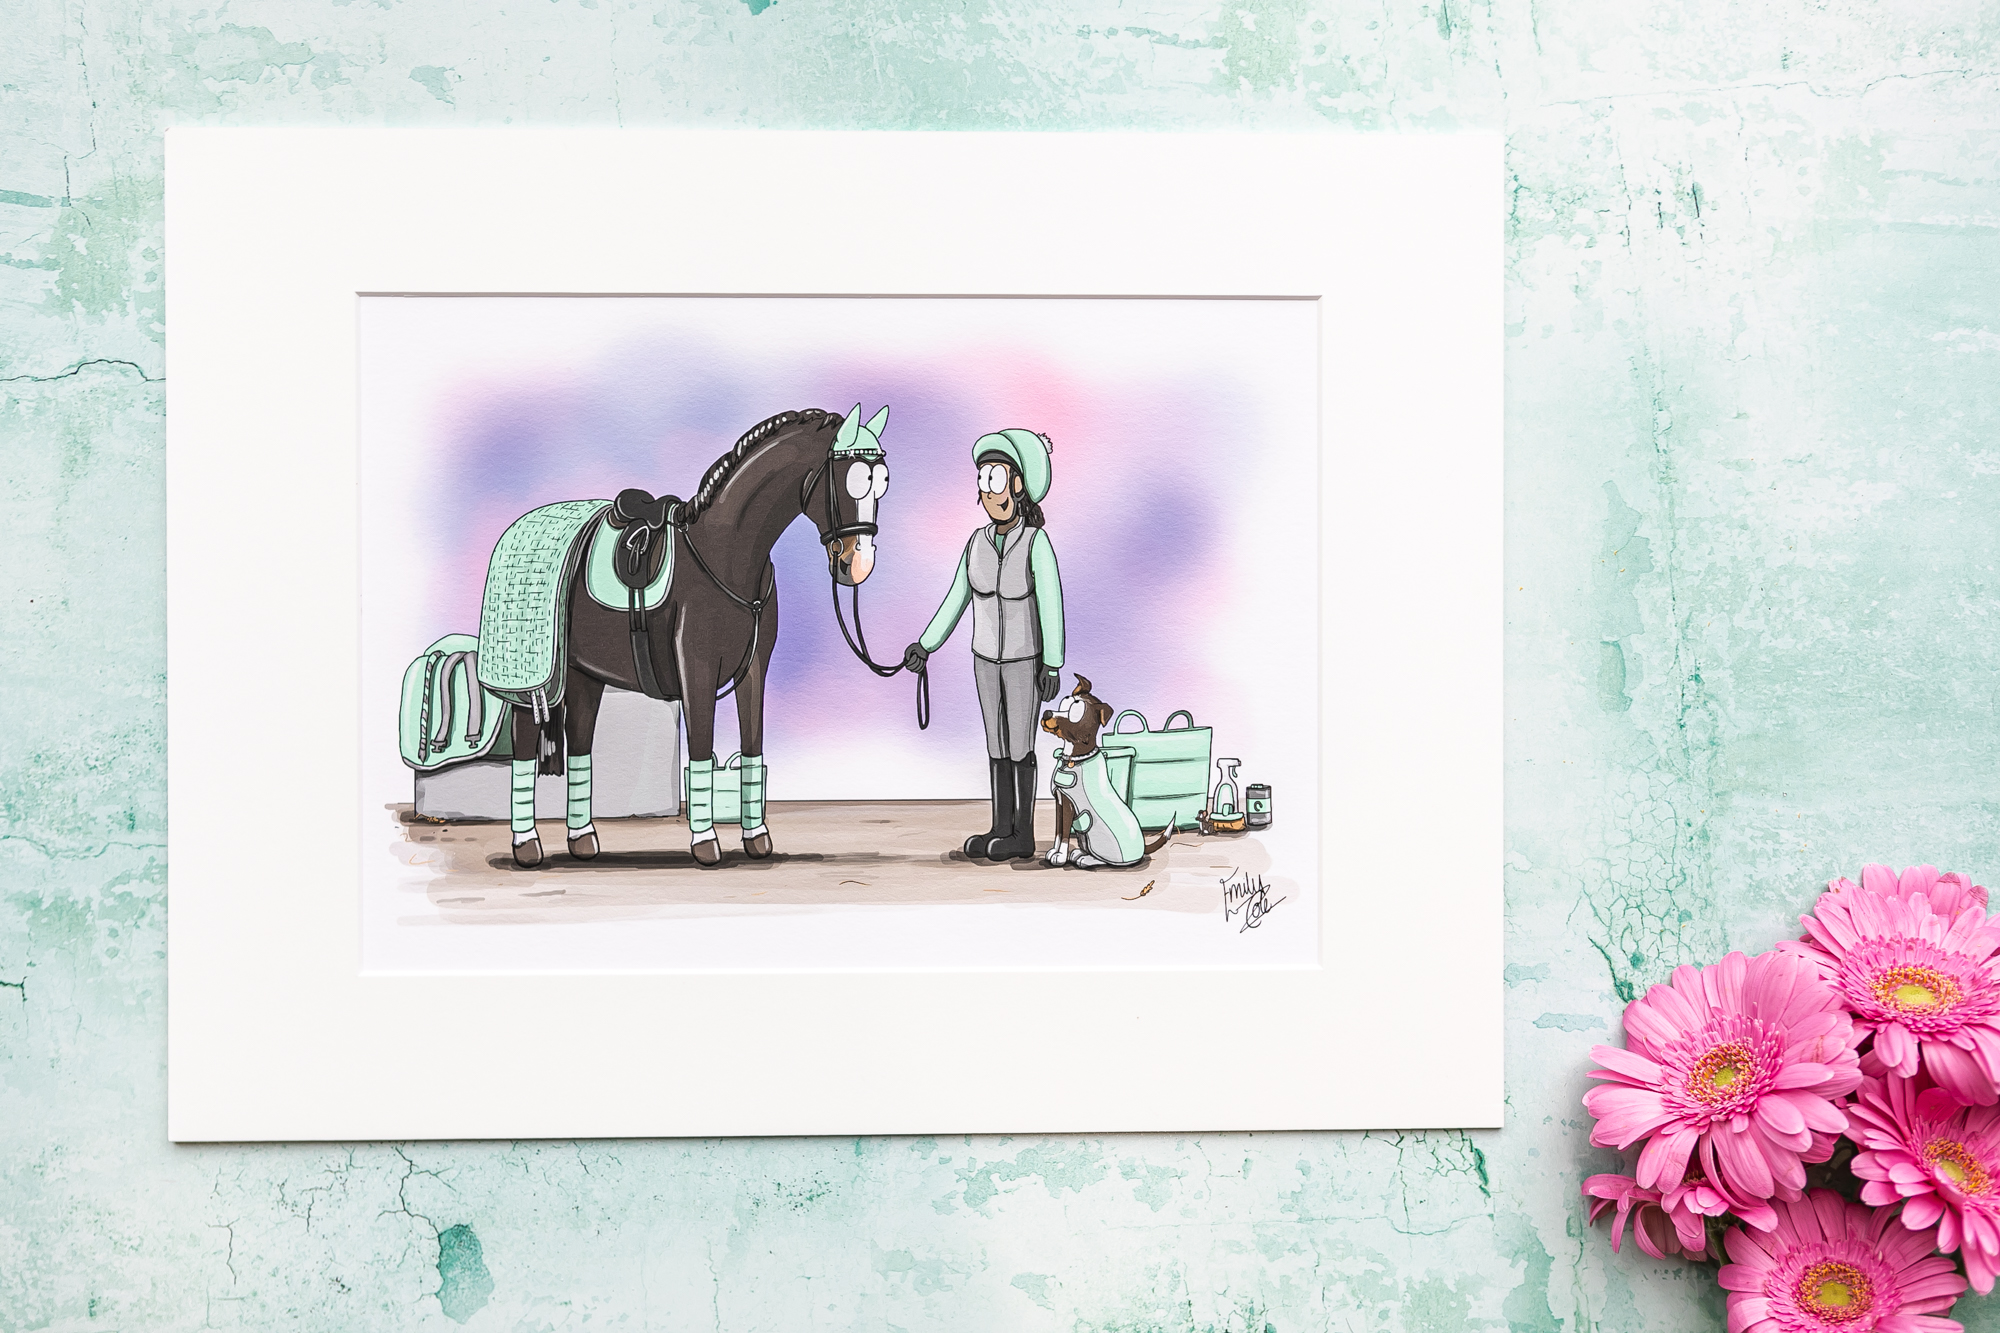 photo of mounted giclee art print. Showing a horse, rider and dog in matching mint green clothing